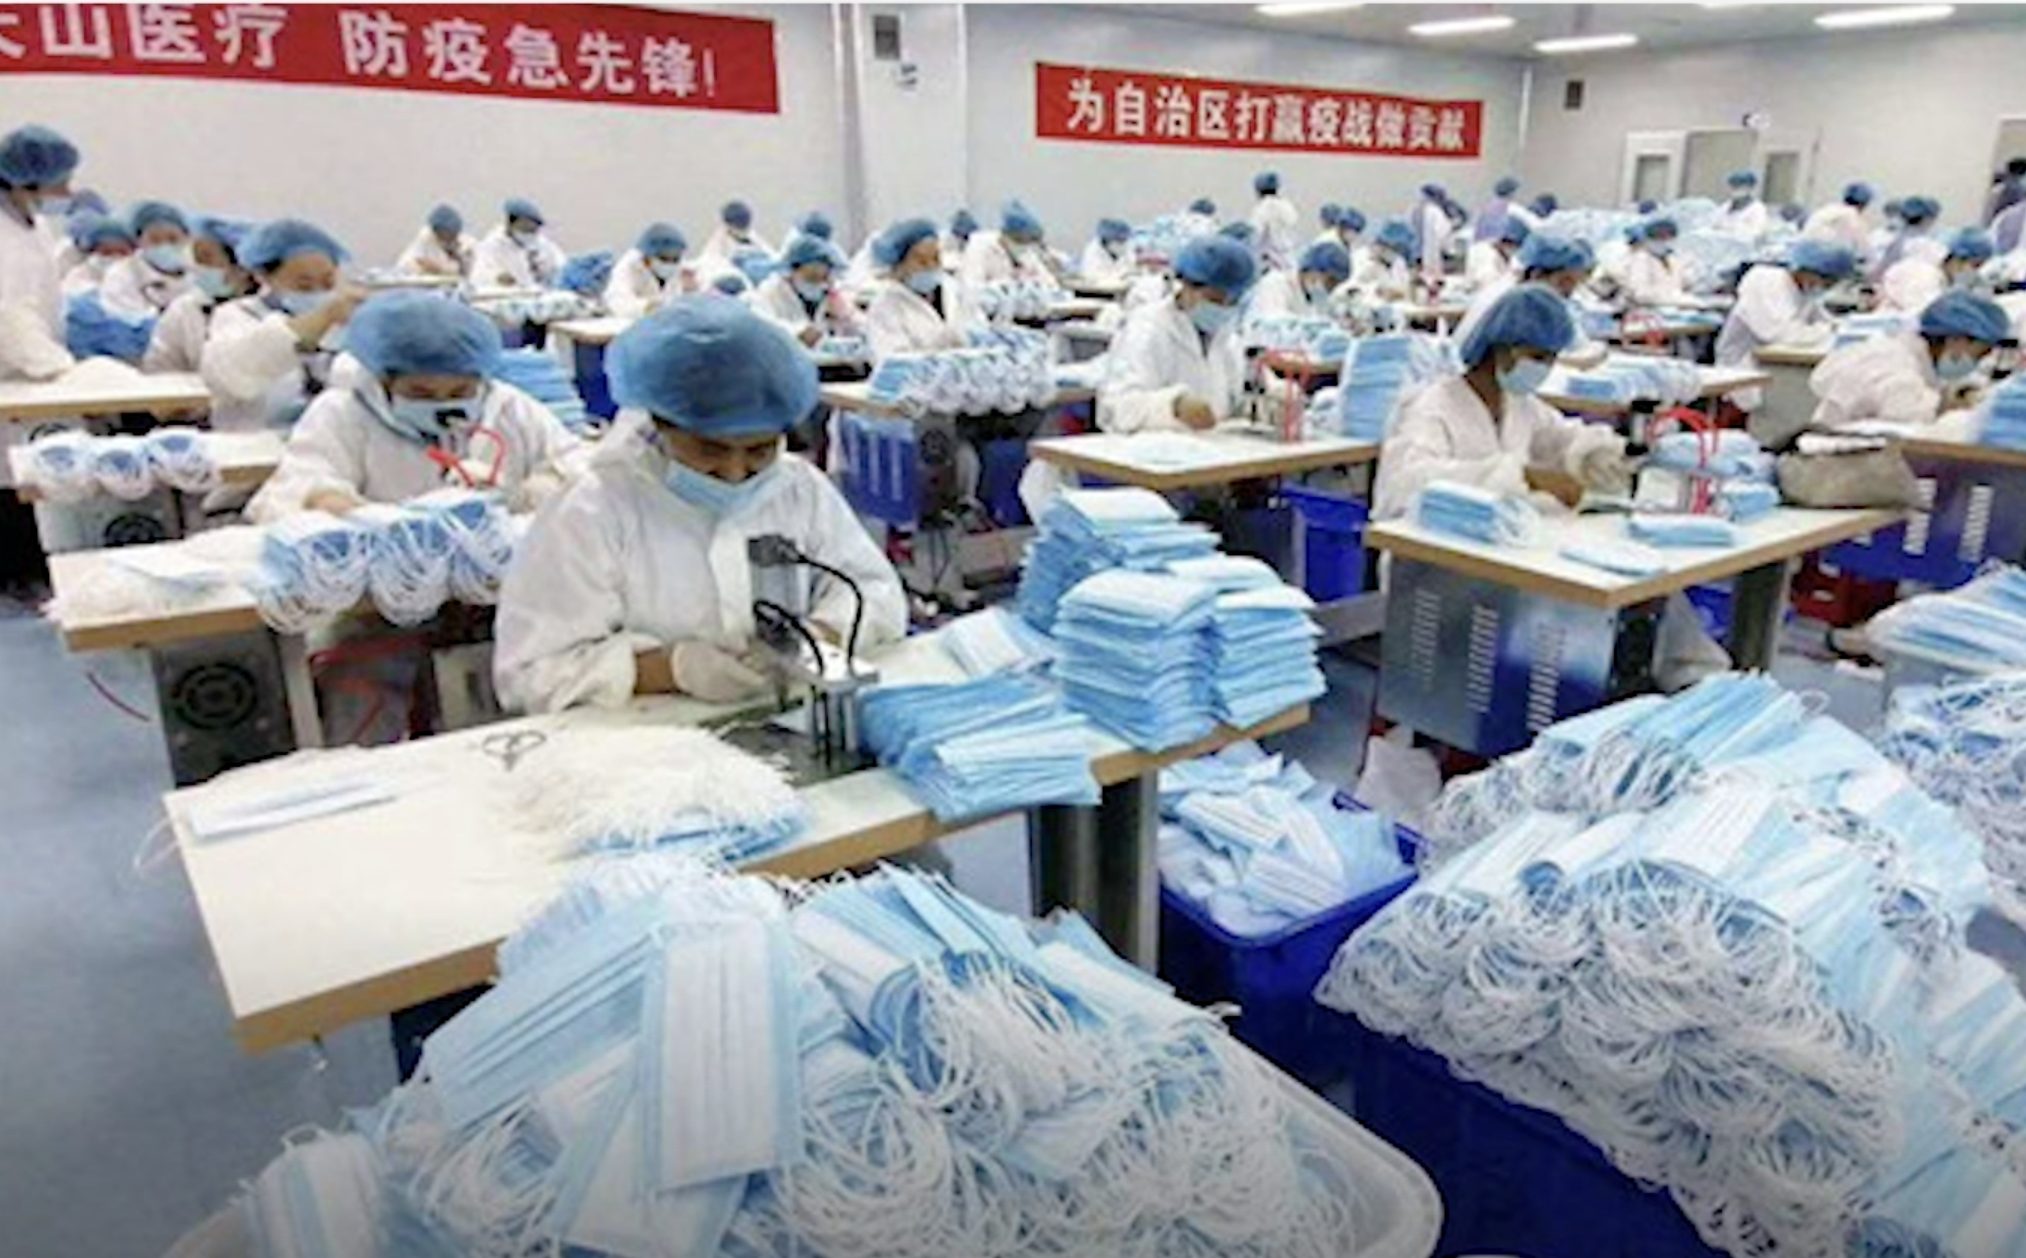 People make masks in a factory, Chinese lettering is present.